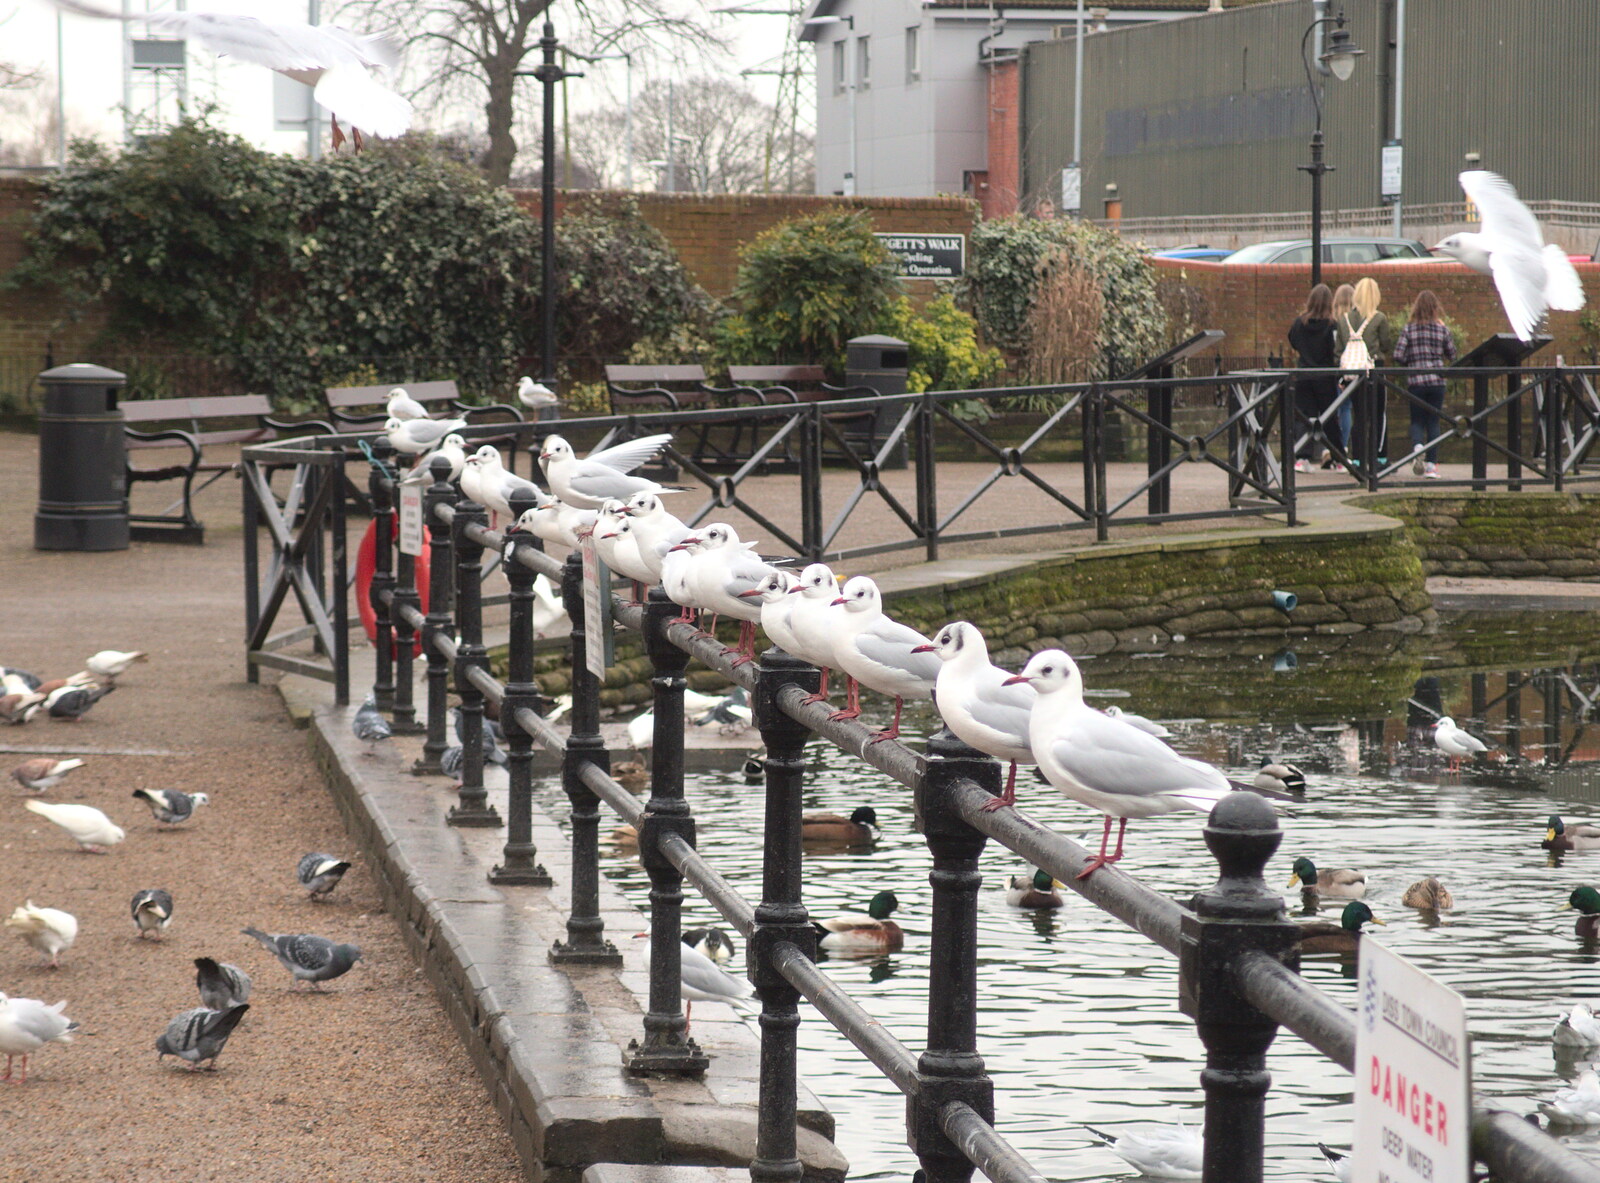 A line of seagulls on the railings from Grandad's Fire and SwiftKey Moves Offices, Eye and Paddington - 23rd January 2017